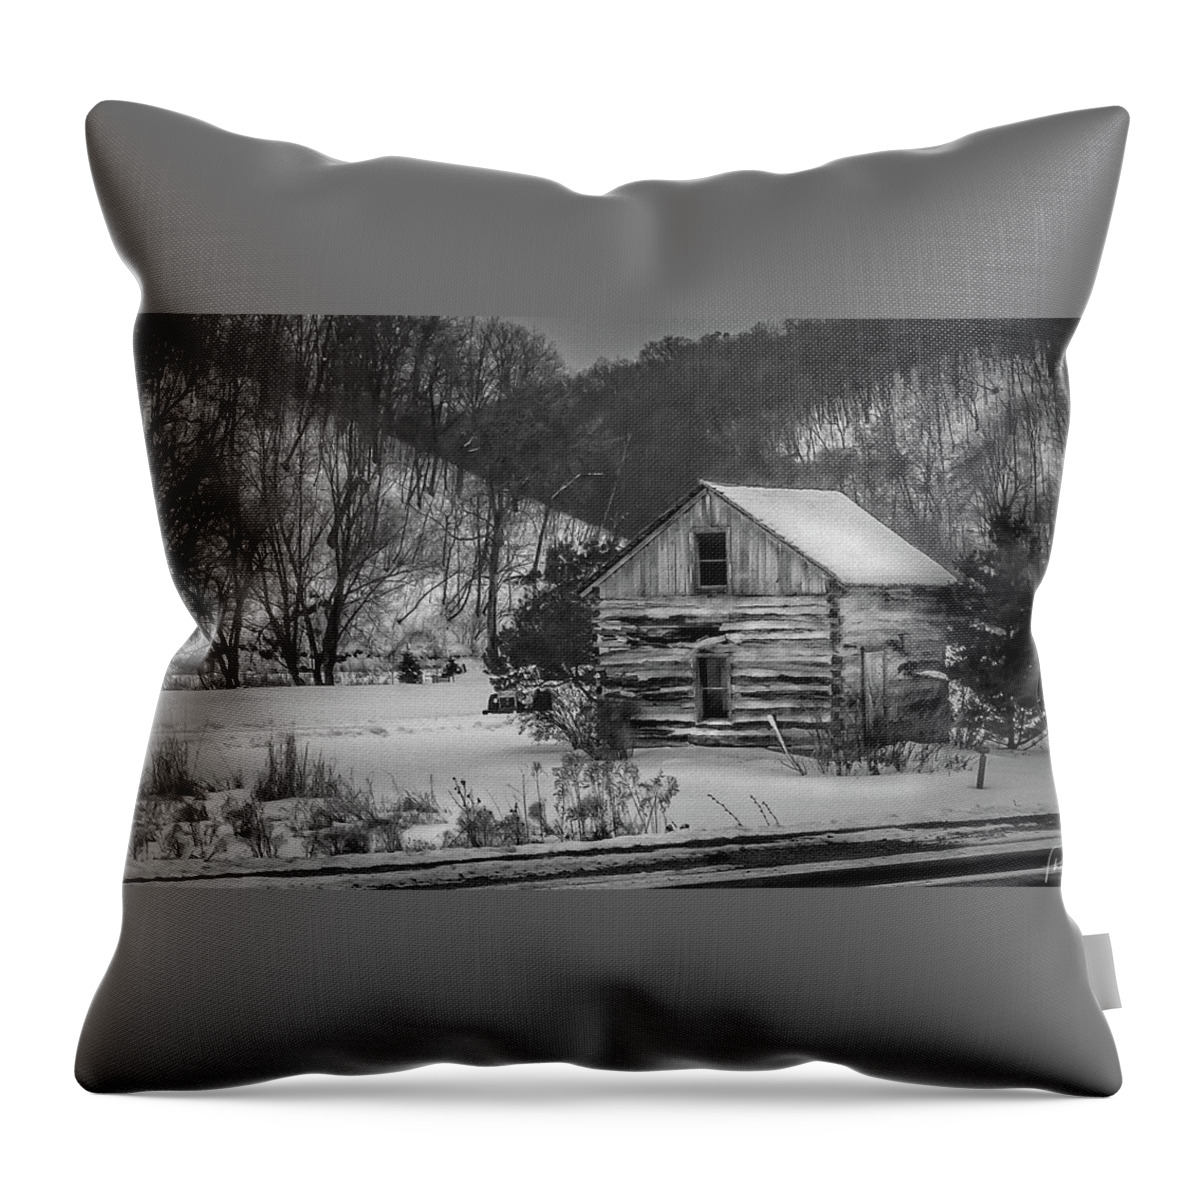 Home Throw Pillow featuring the photograph Cabin 3 by Phil S Addis